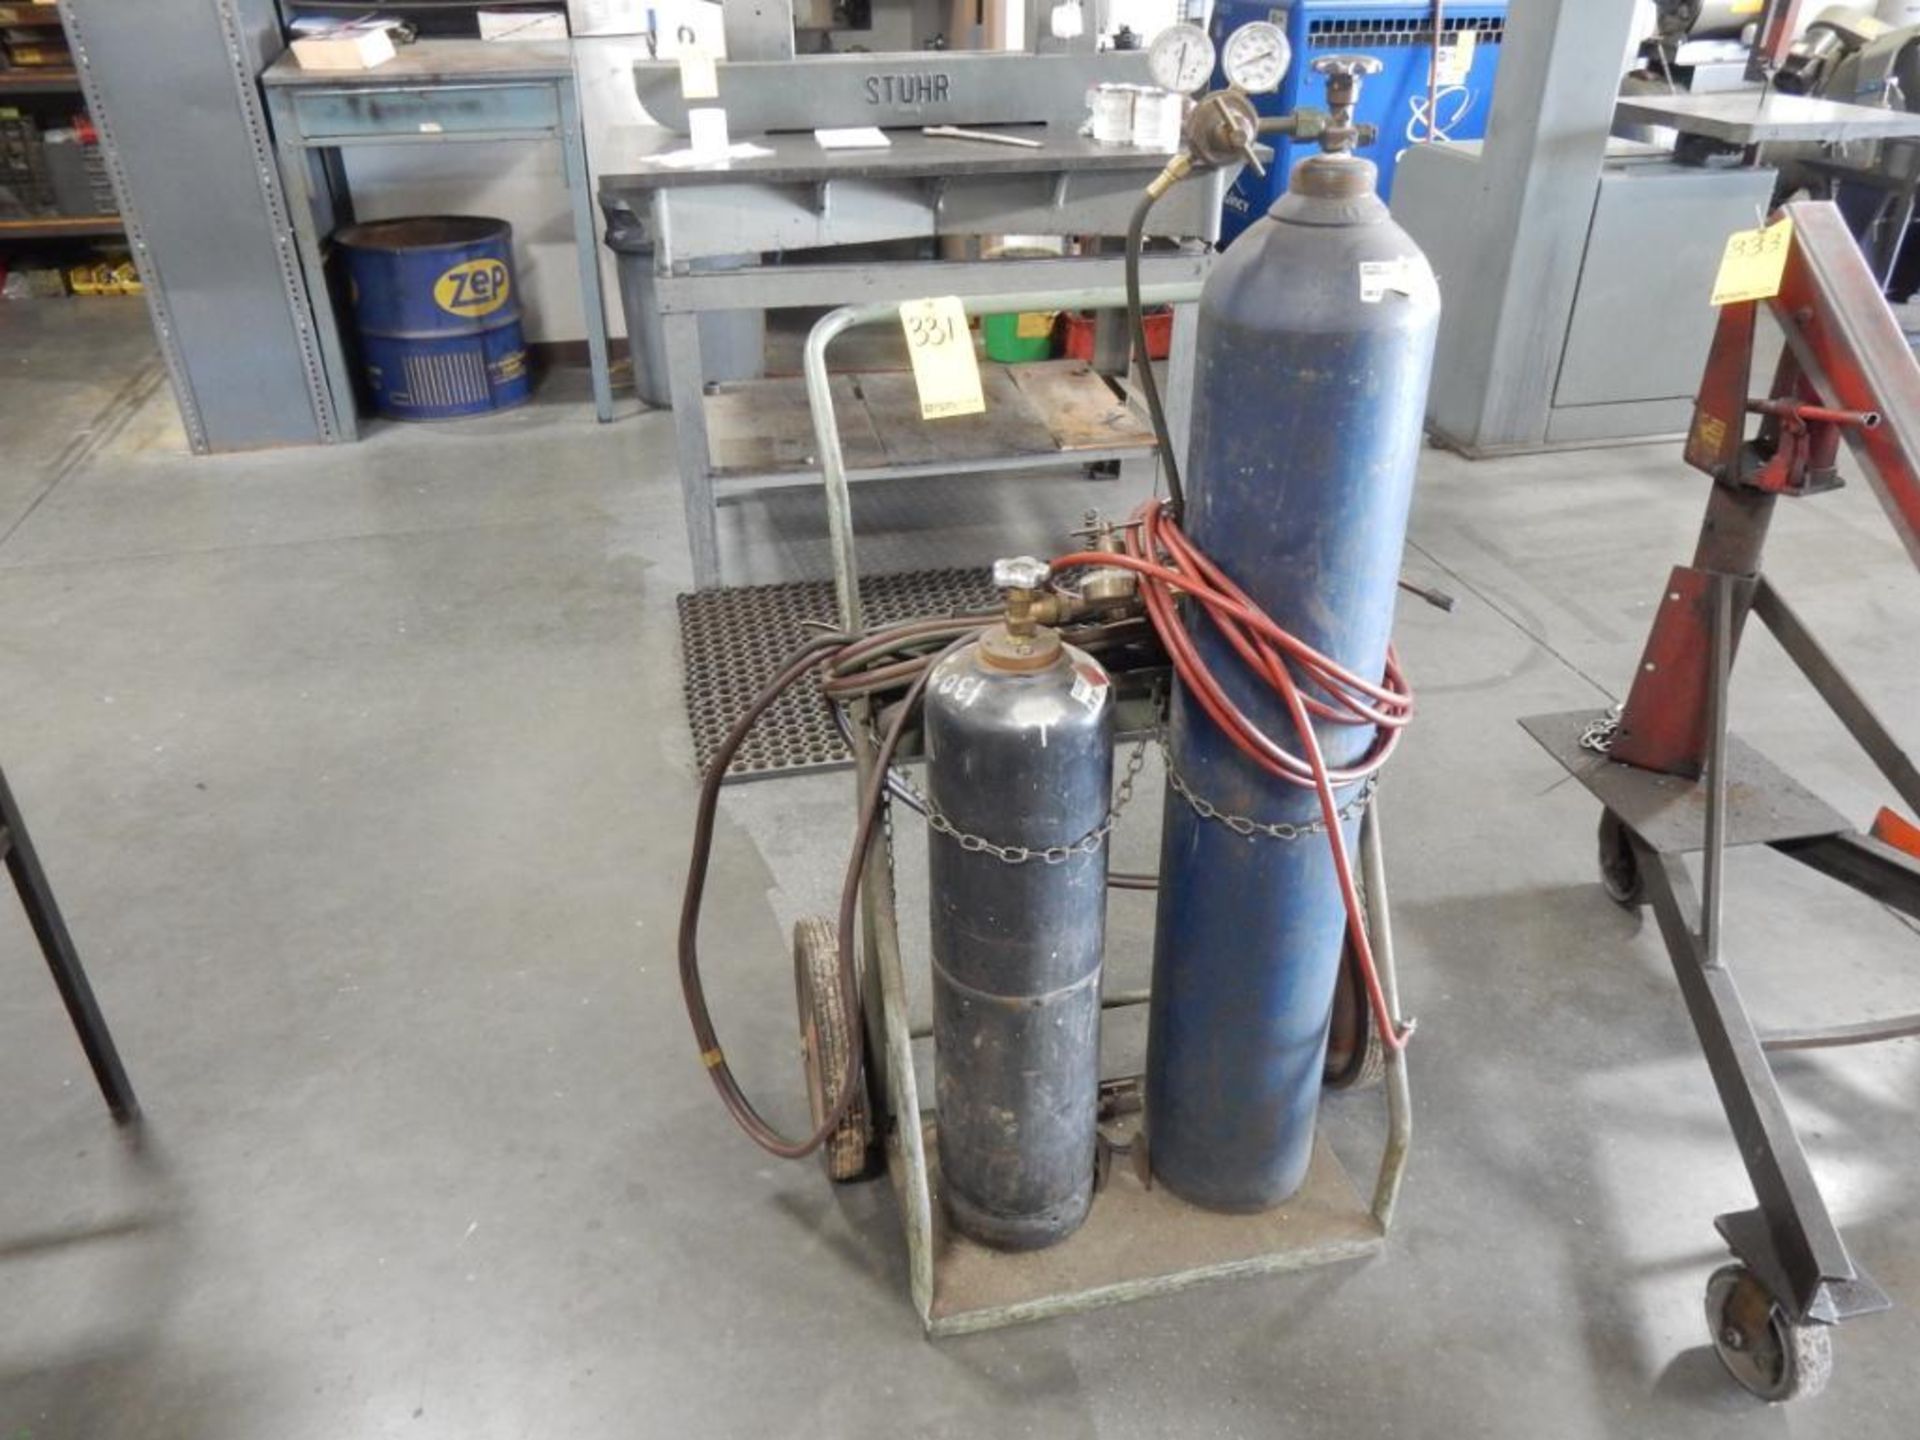 TORCH CART, TORCH, GAUGES, HOSE (NO TANKS INCLUDED)